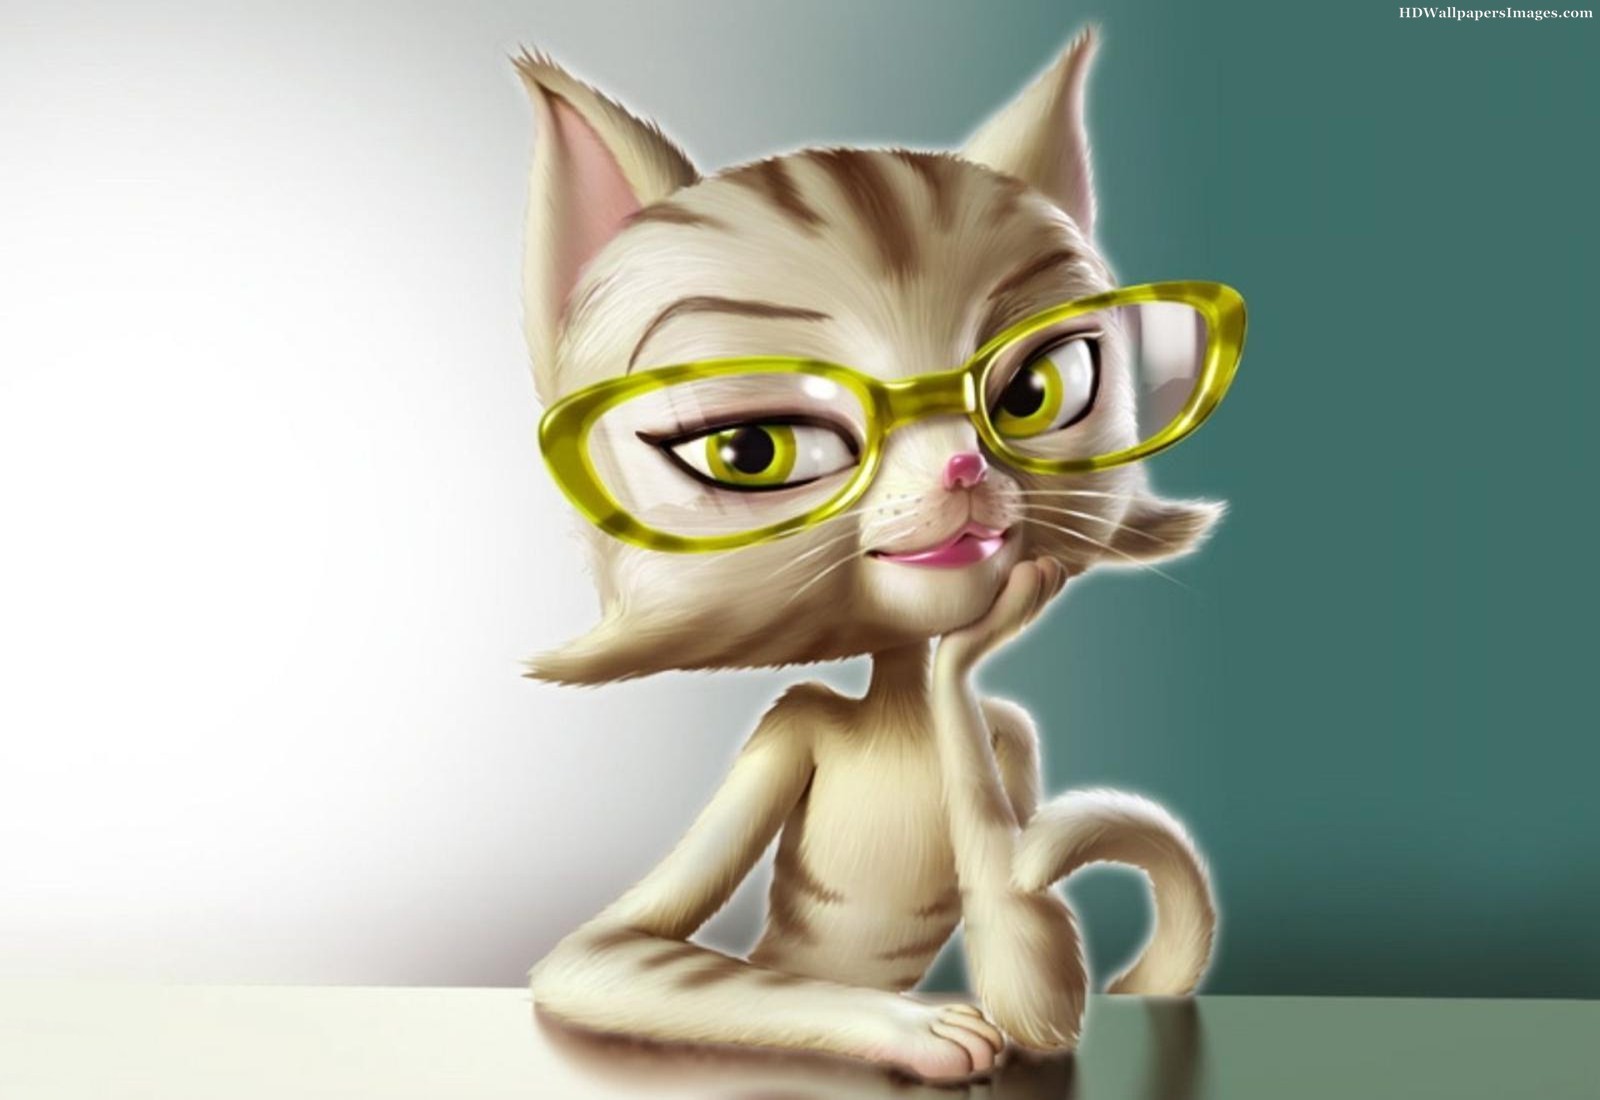 Free 3d Cartoon, Download Free 3d Cartoon png images, Free